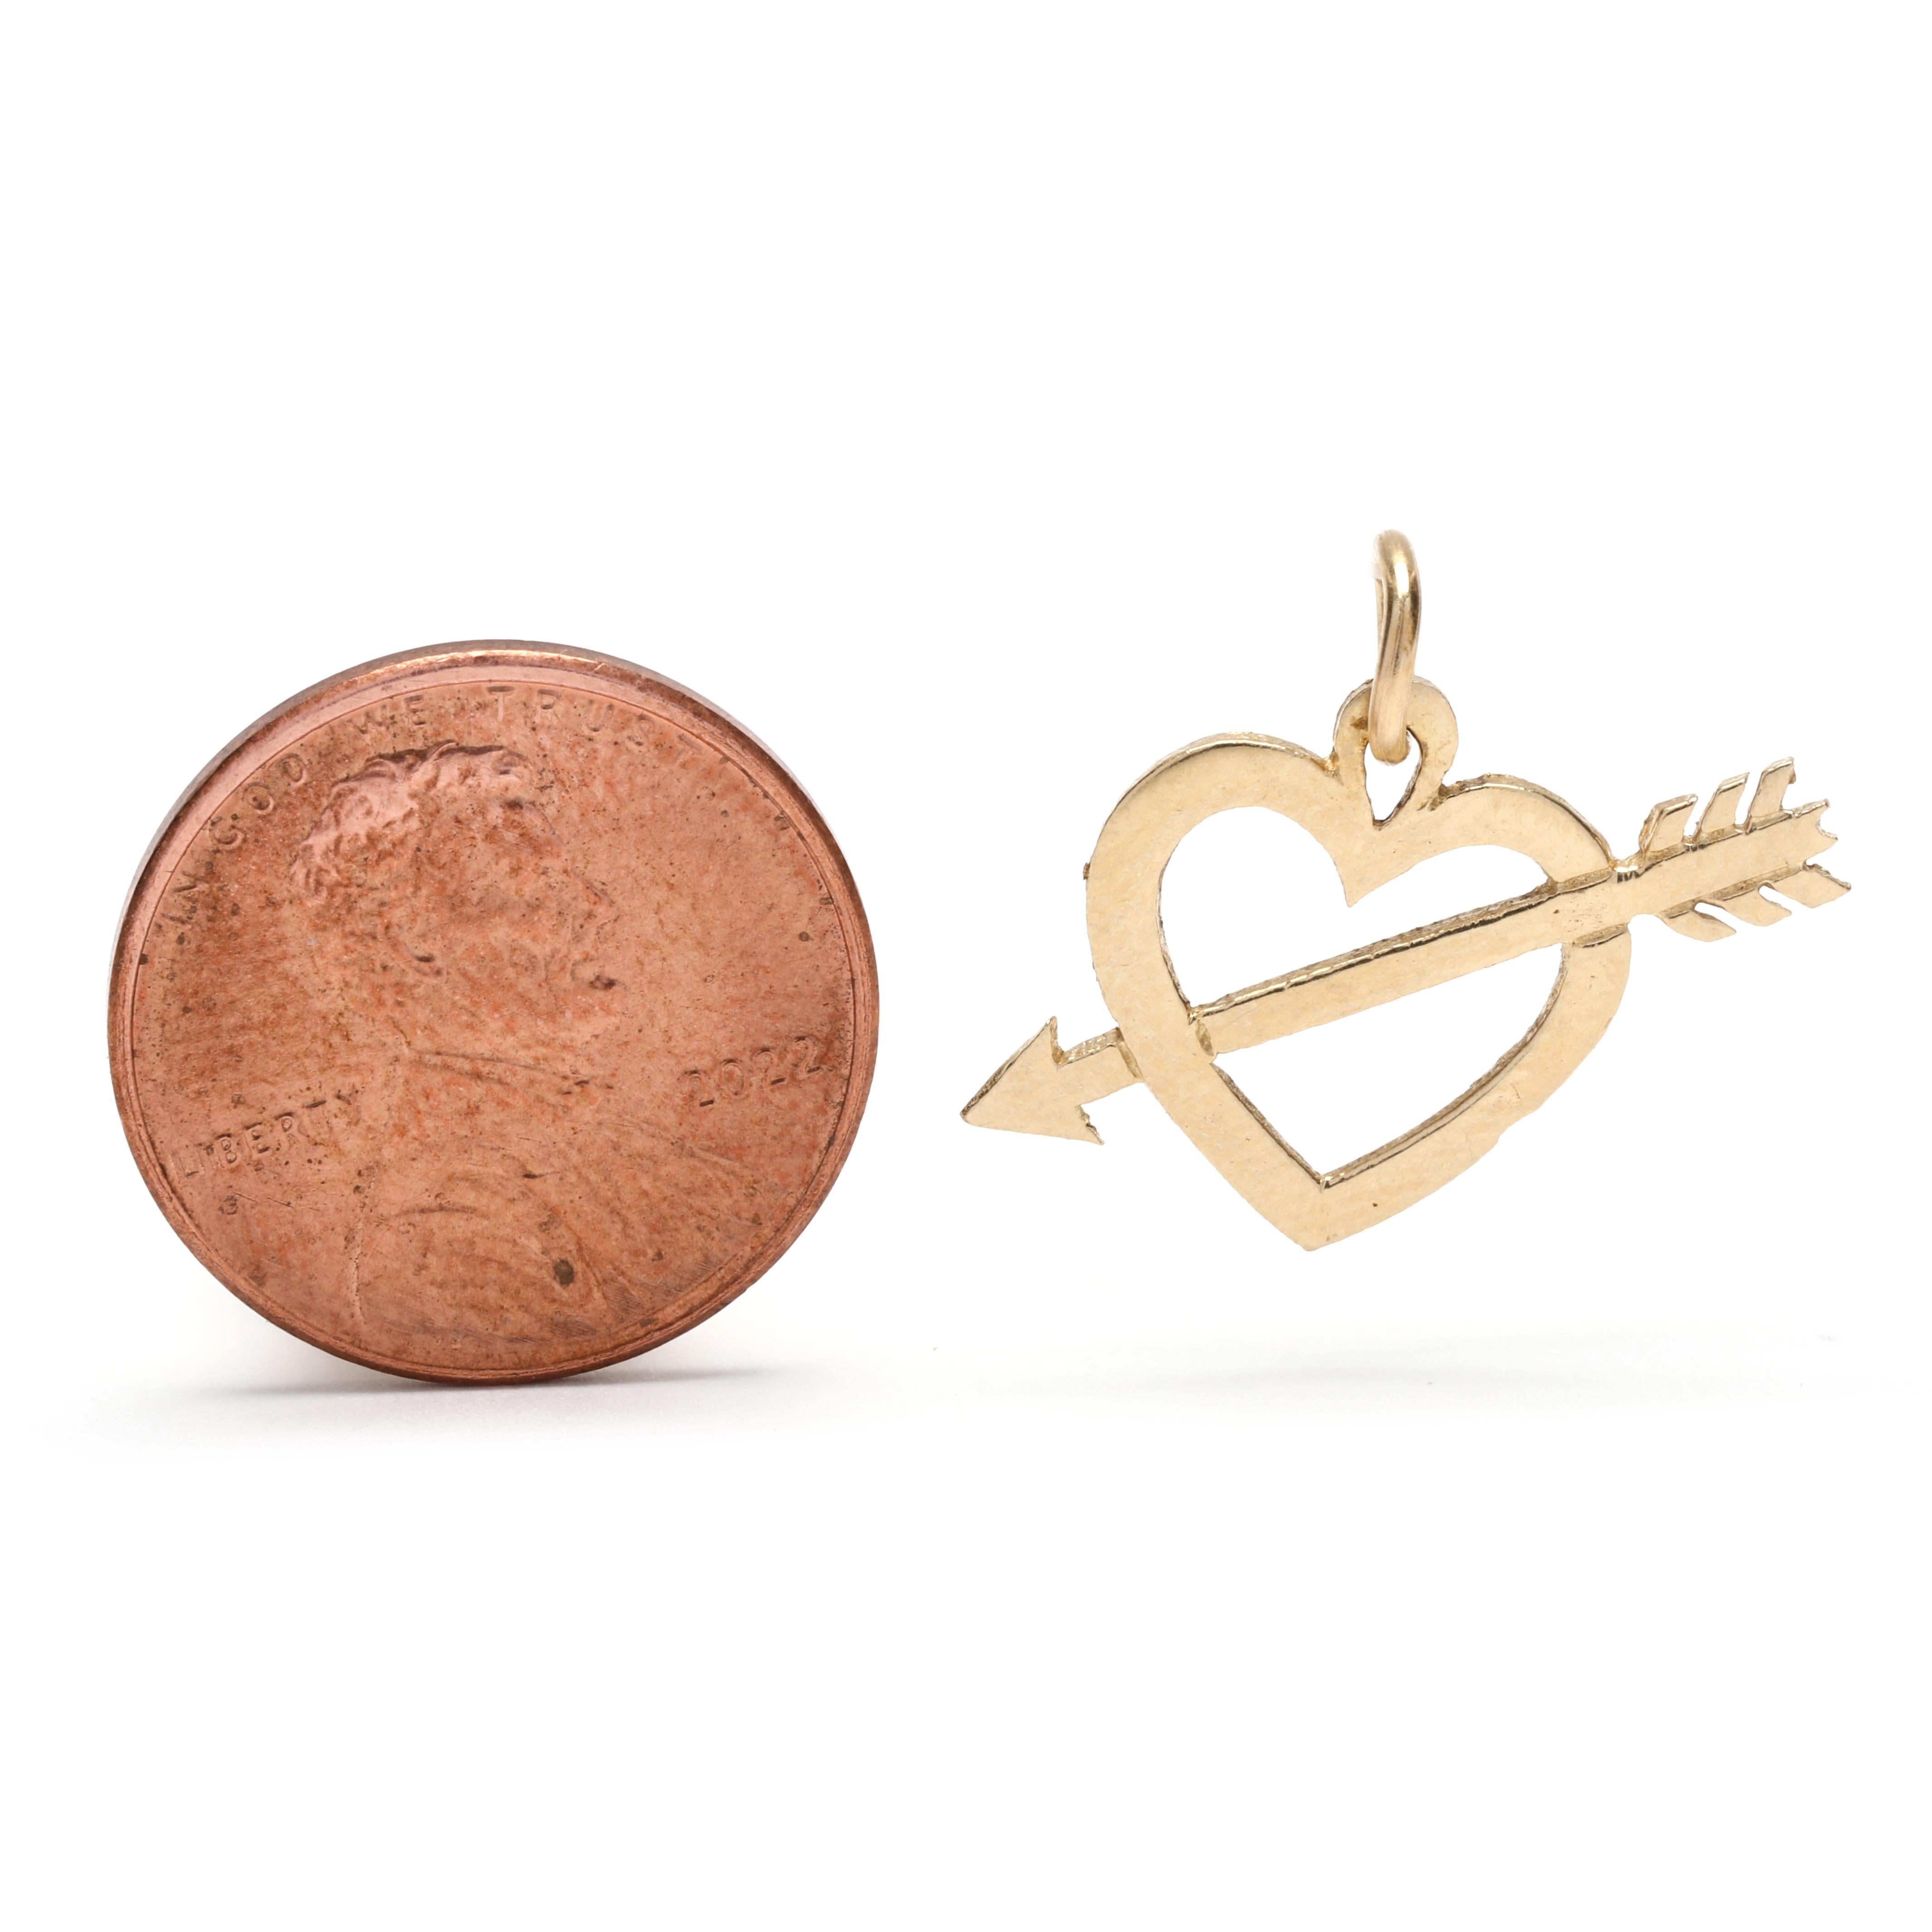 This 14K yellow gold small arrow heart charm is the perfect addition to any jewelry collection. The charm measures 5/8 inch in length and features a small heart with a tiny arrow piercing through it. This delicate charm is perfect for adding a